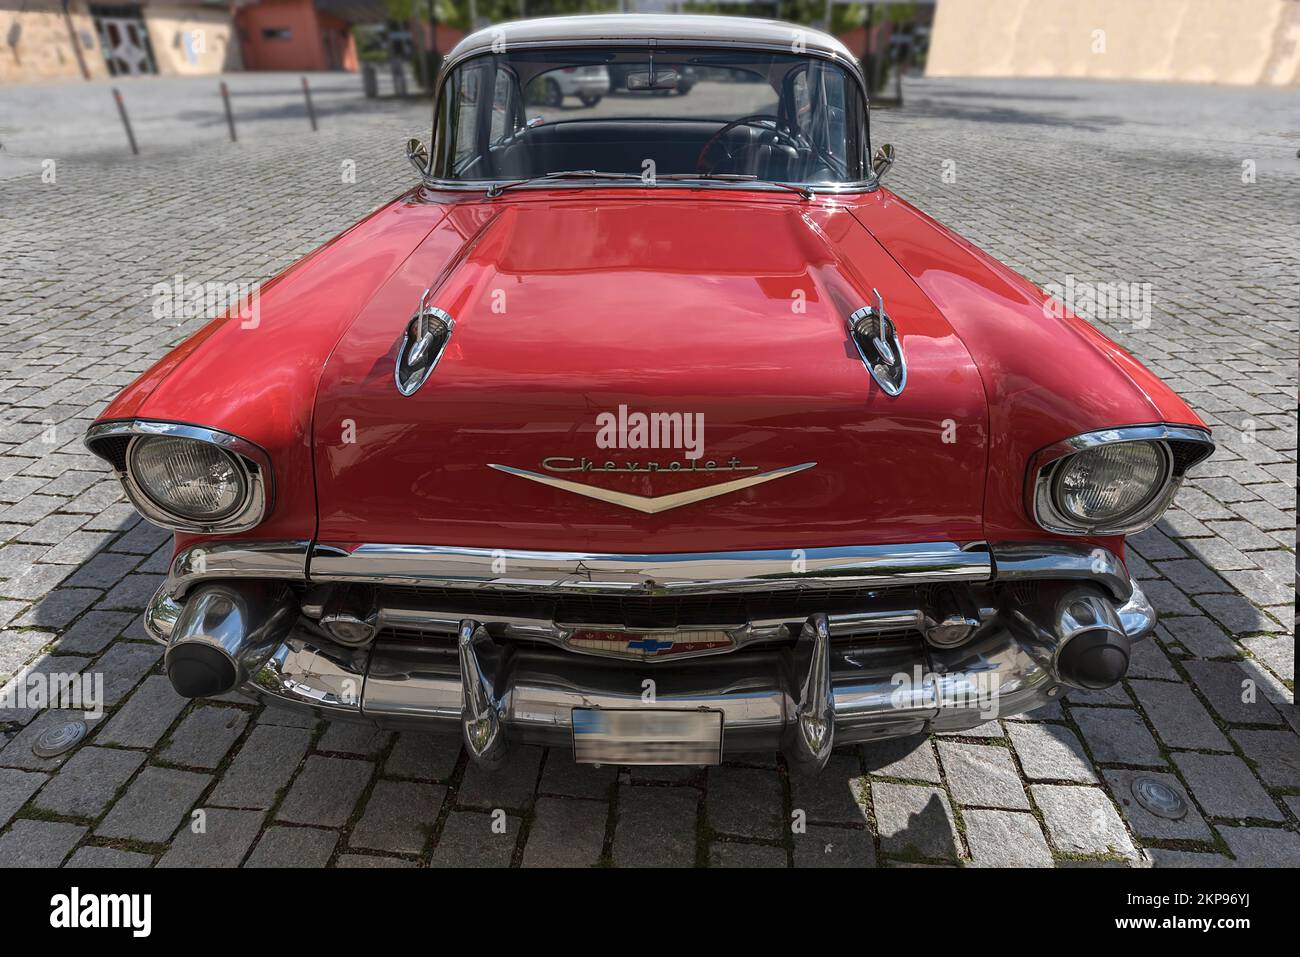 Front view of Chevrolet Belair, American classic car, built 1953 to 1975, Bavaria, Germany, Europe Stock Photo